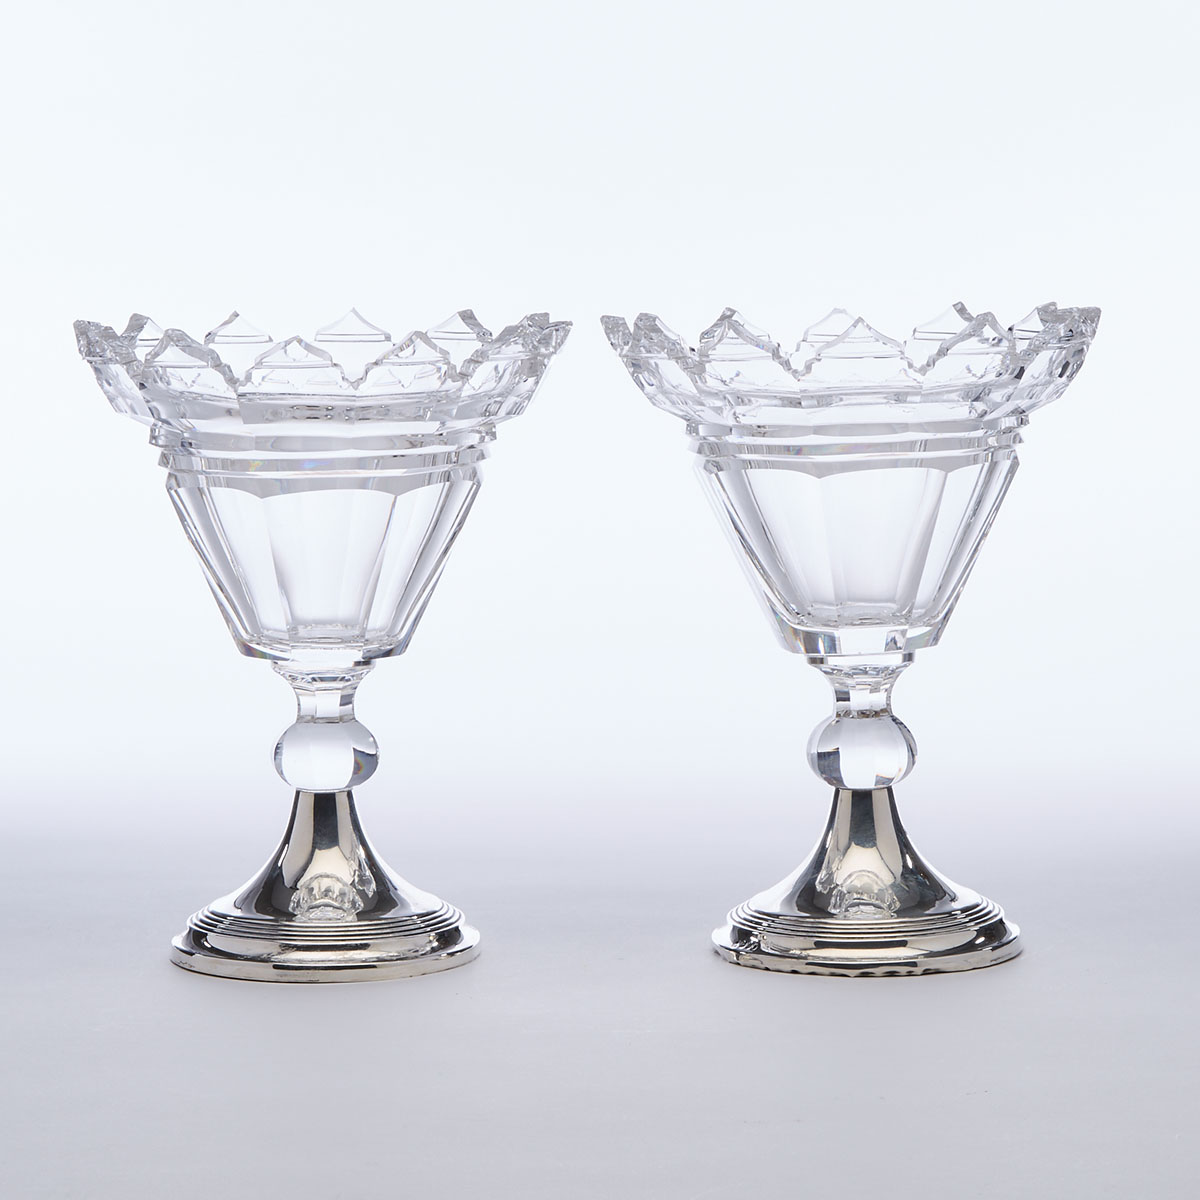 Pair of Dutch Silver Mounted Cut Glass Vases, Schoonhoven, 1837